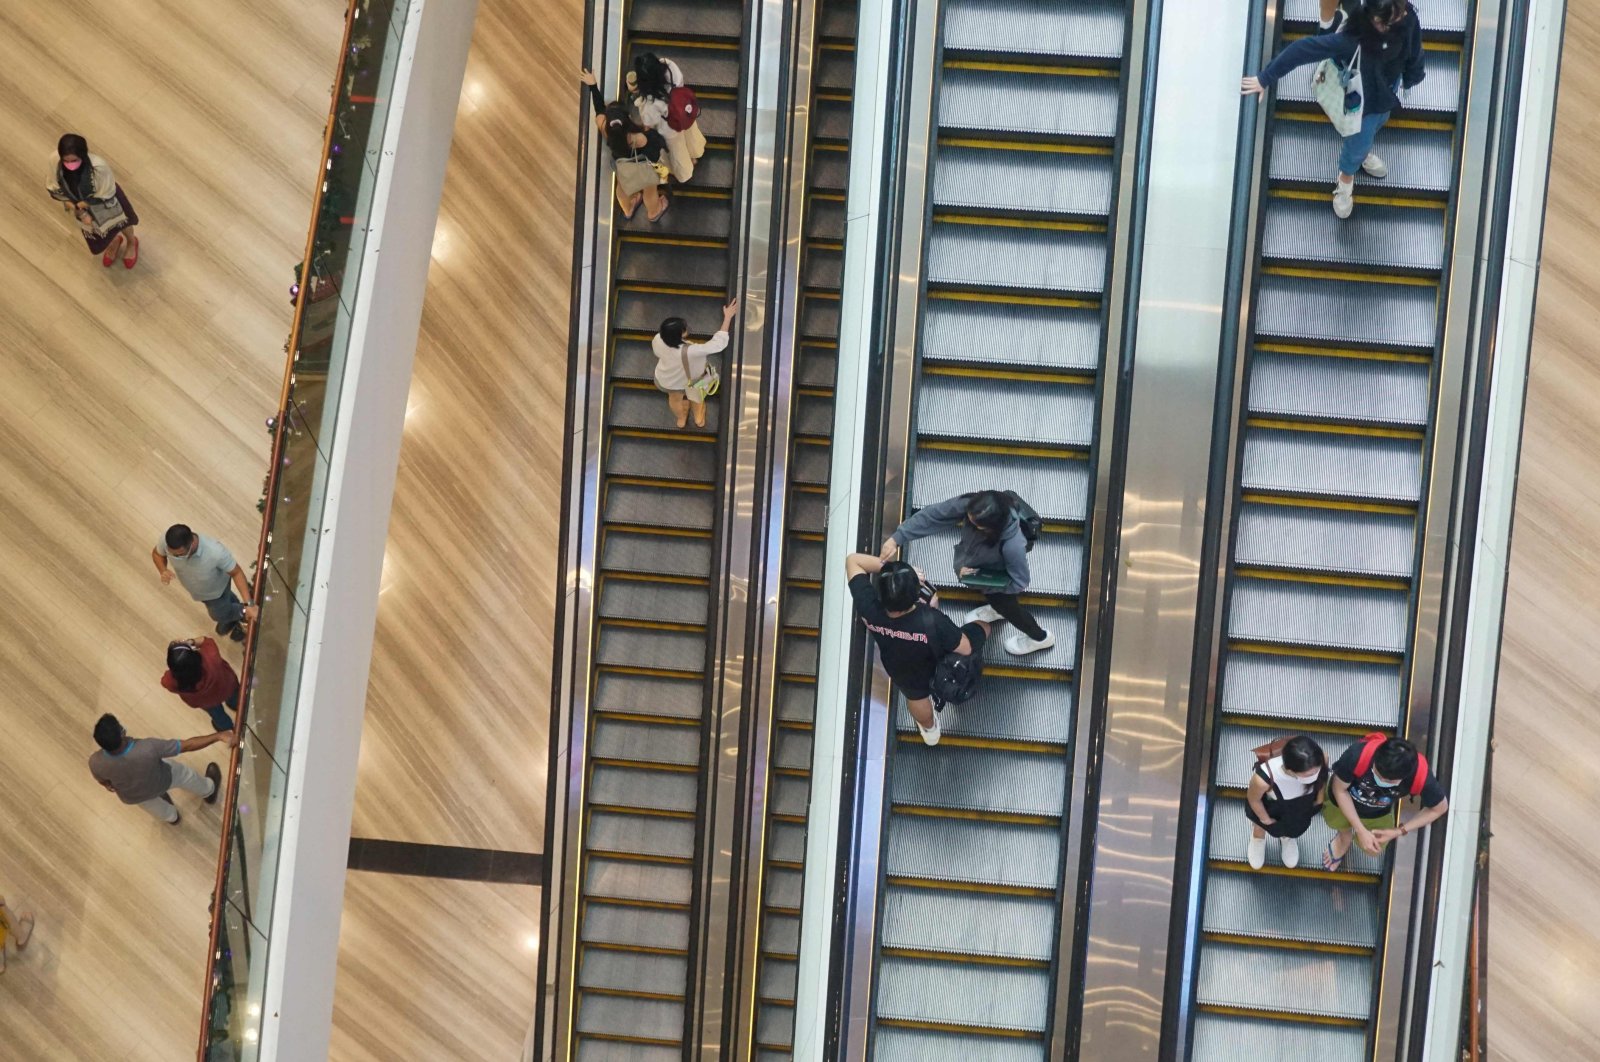 People ride on escalators inside the mall at Changi Jewel in Singapore, Nov. 18, 2021. (AFP Photo)